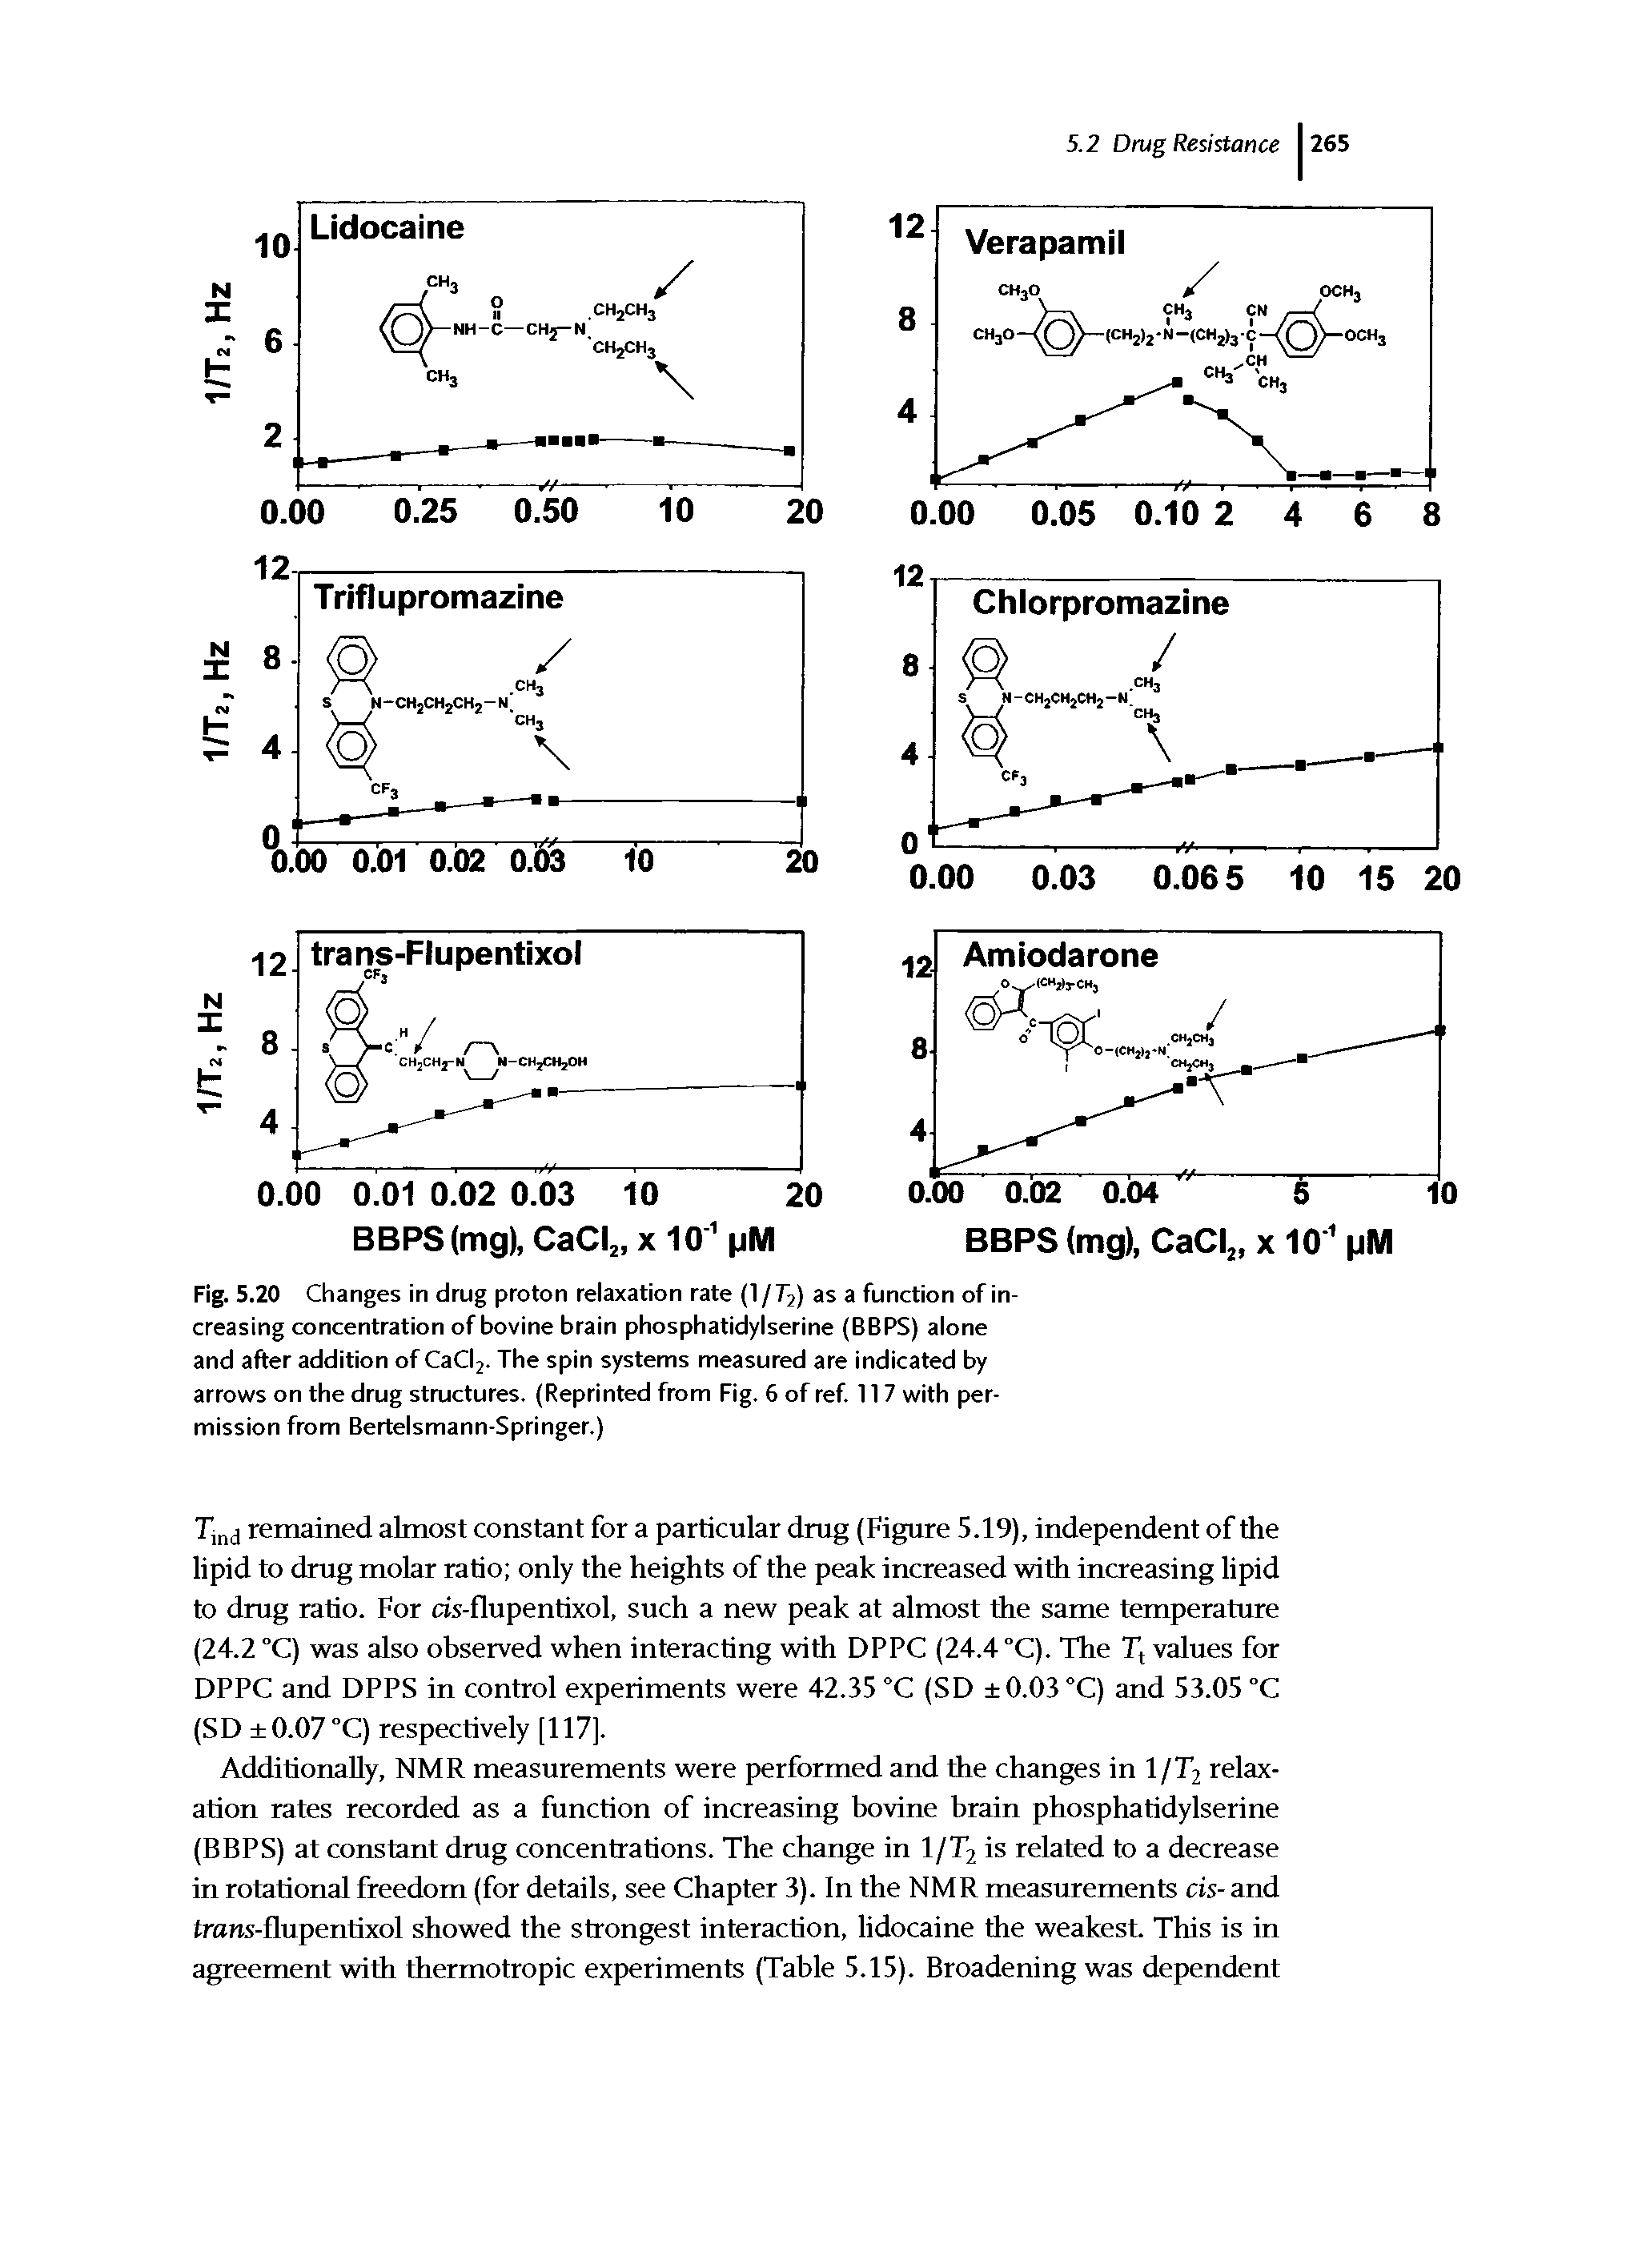 Fig. 5.20 Changes in drug proton relaxation rate (1 /T2) as a function of increasing concentration of bovine brain phosphatidylserine (BBPS) alone and after addition of CaCI2- The spin systems measured are indicated by arrows on the drug structures. (Reprinted from Fig. 6 of ref. 117 with permission from Bertelsmann-Springer.)...